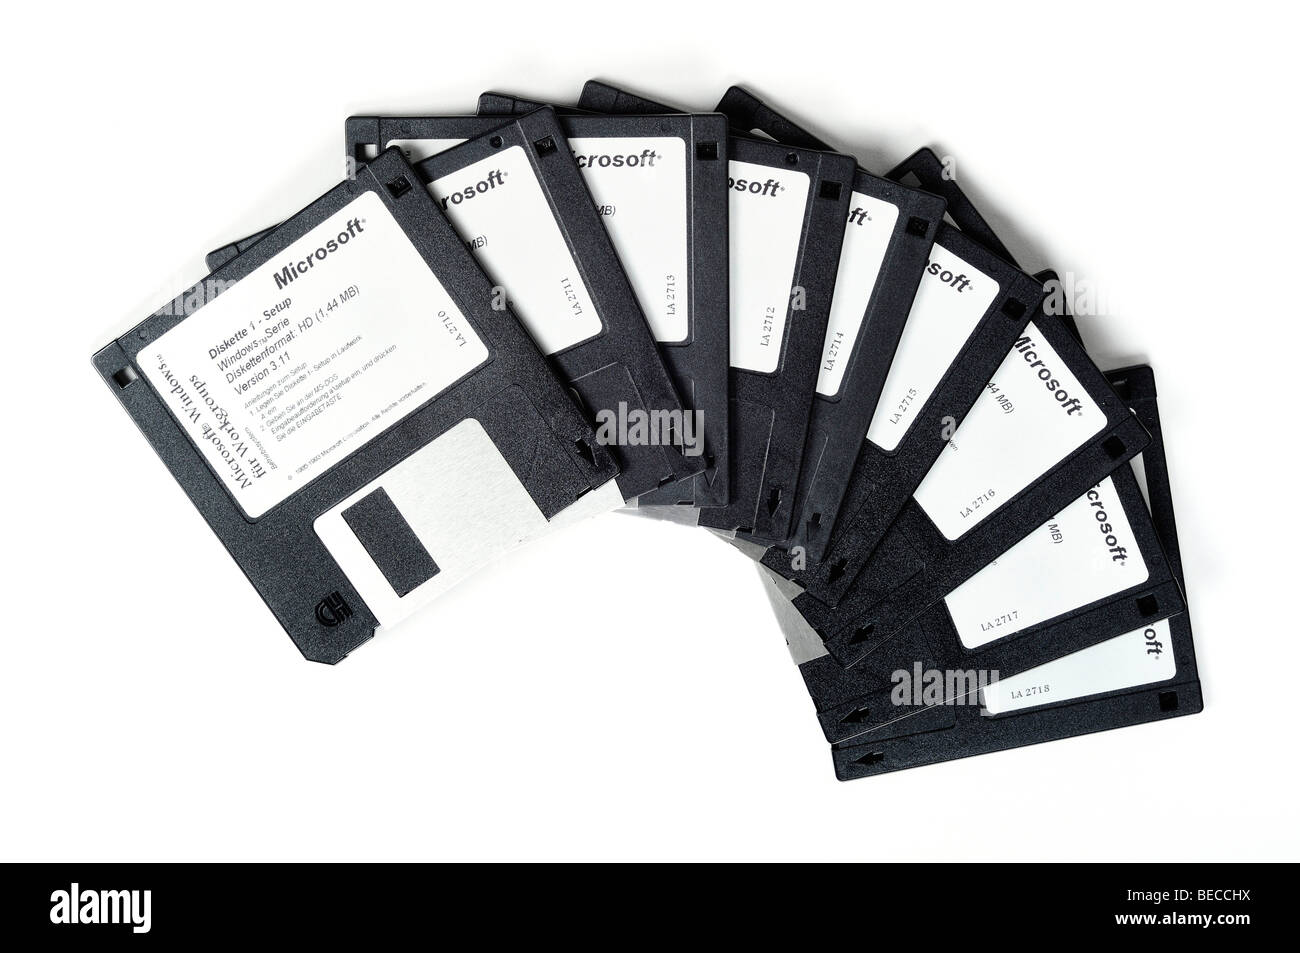 Diskettes, Microsoft Windows for Workgroups Stock Photo